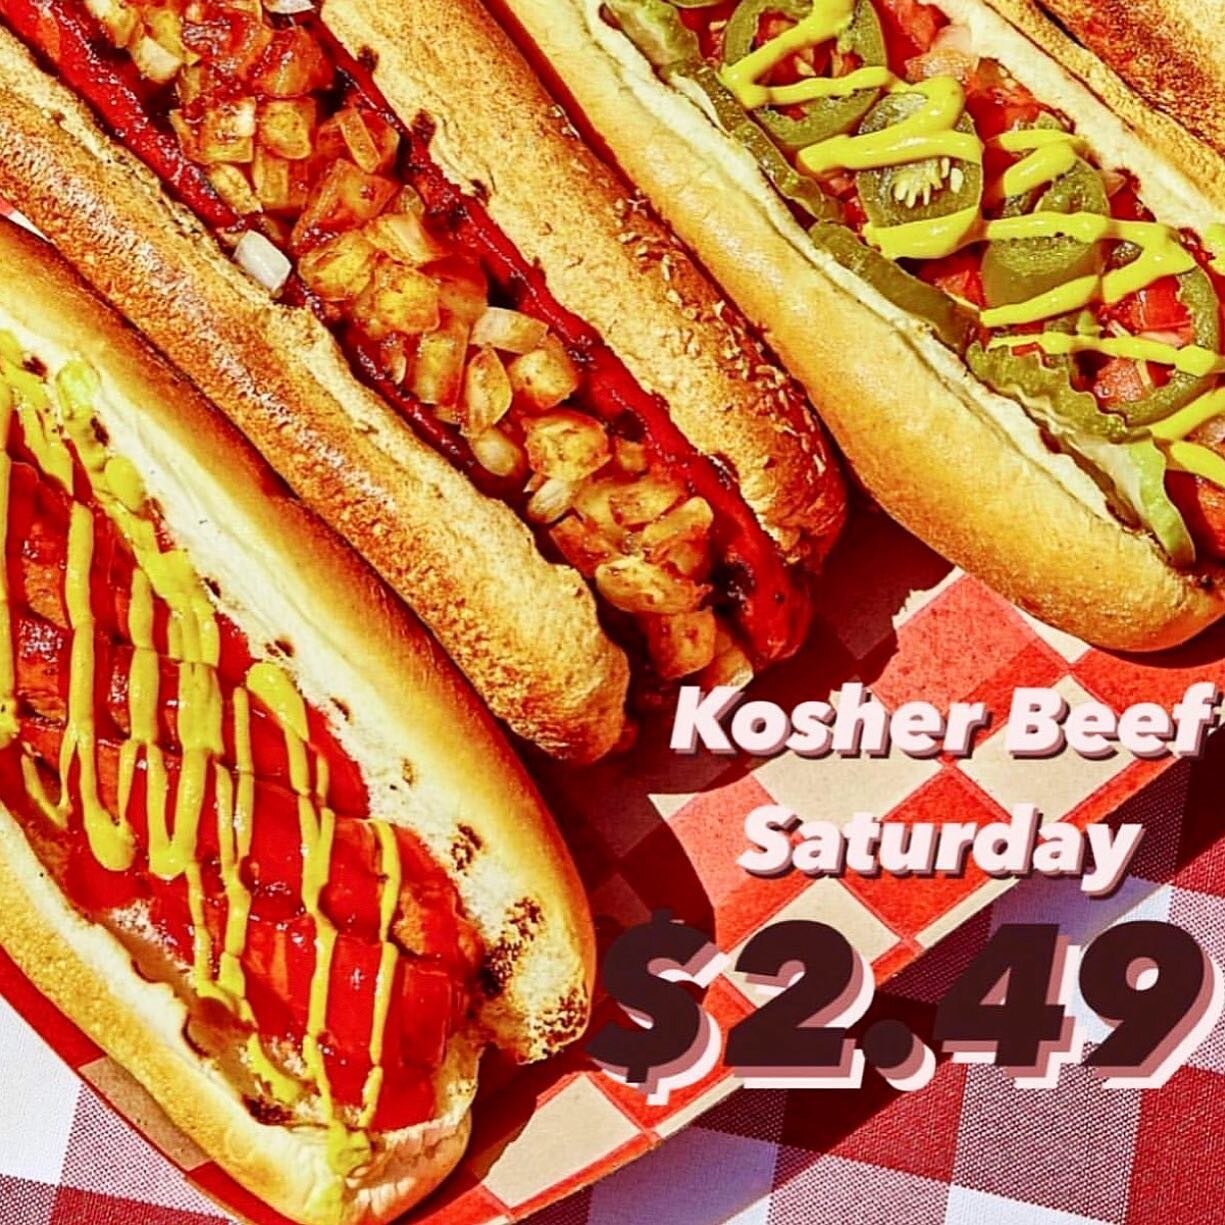 Satur-YAY for Kosher Beef Dogs only $2.49 all zay! Load em up with Chili, Cheese, Pastrami&hellip;or any of our other 15+ toppings! See you at 10:30 😋